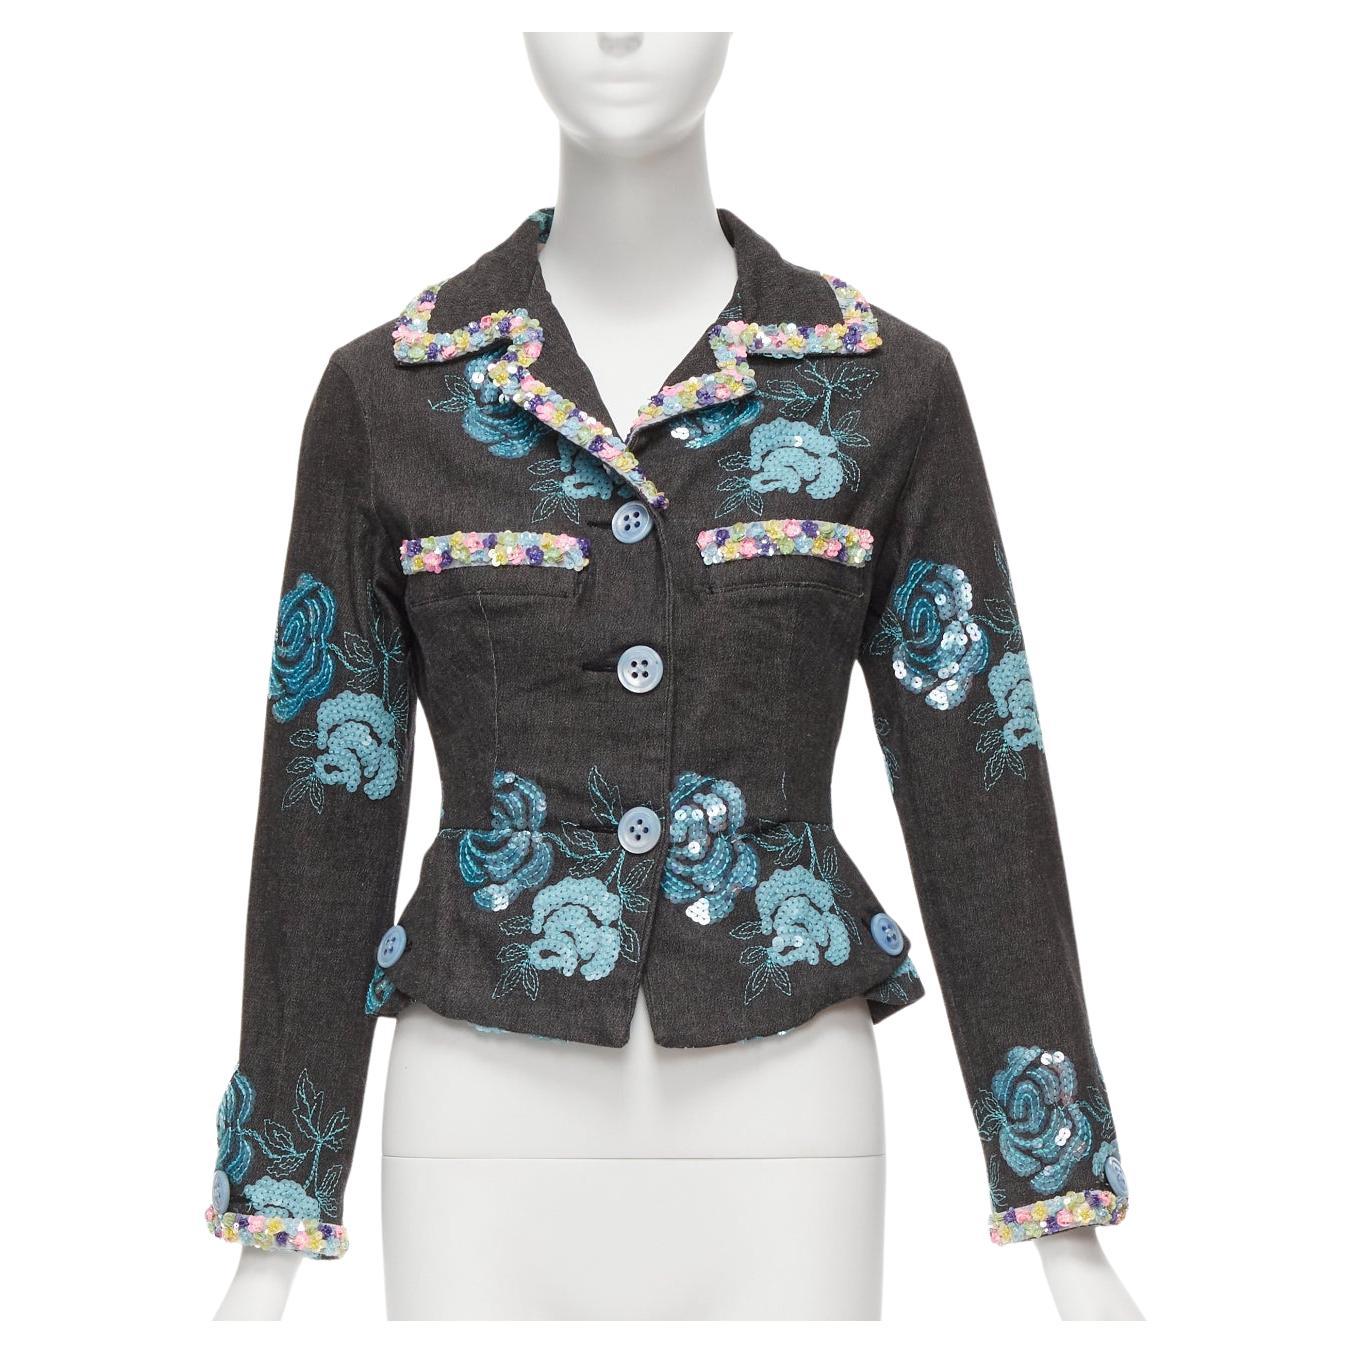 VOYAGE INVEST IN THE ORIGINAL LONDON colourful sequins twill peplum jacket S For Sale